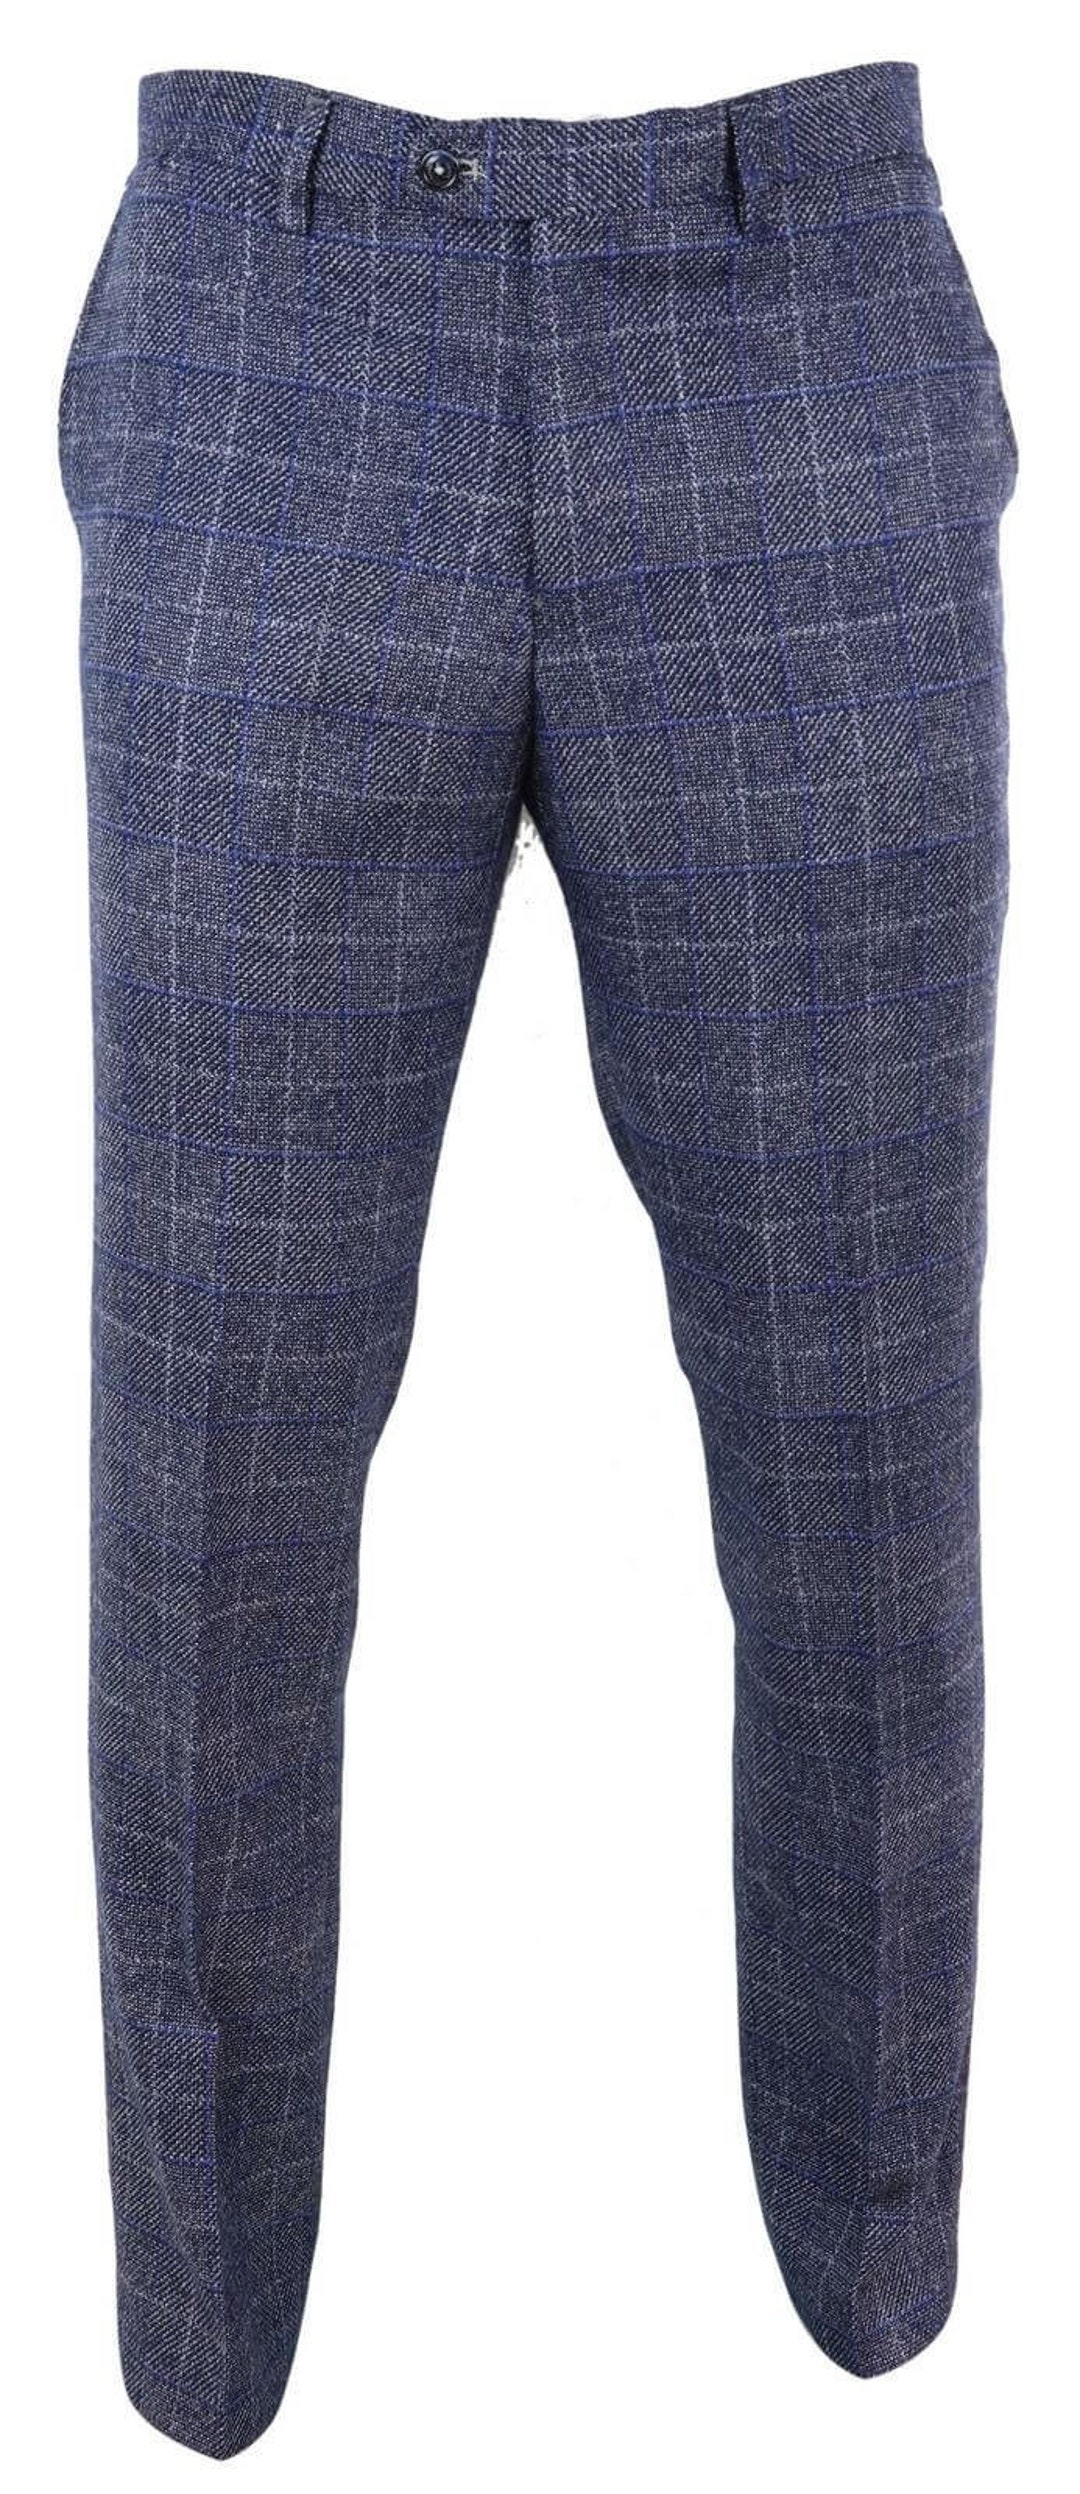 Mens Vintage Style Suit Trousers in Pinstripe  Checks  XPOSED London